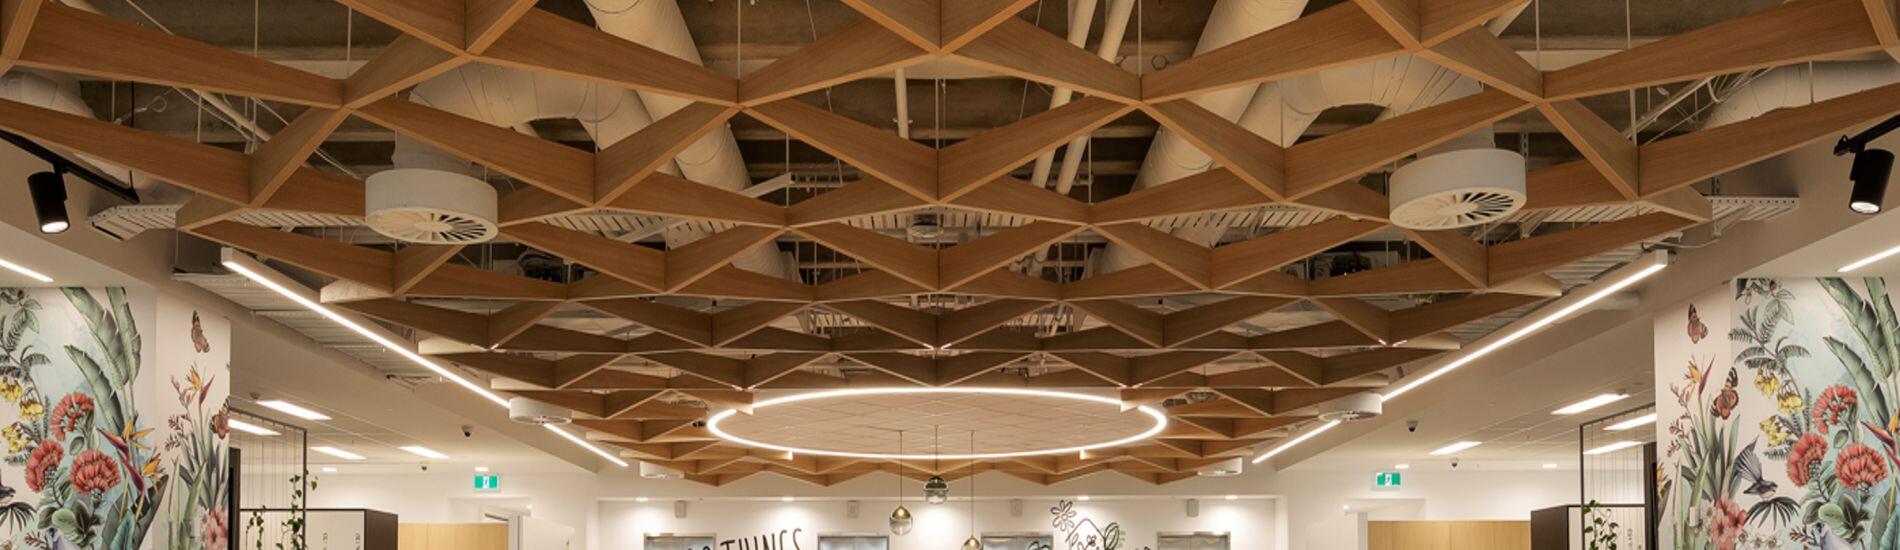 Lightweight MAXI BEAM Form Woven Effect on Workspace Ceiling